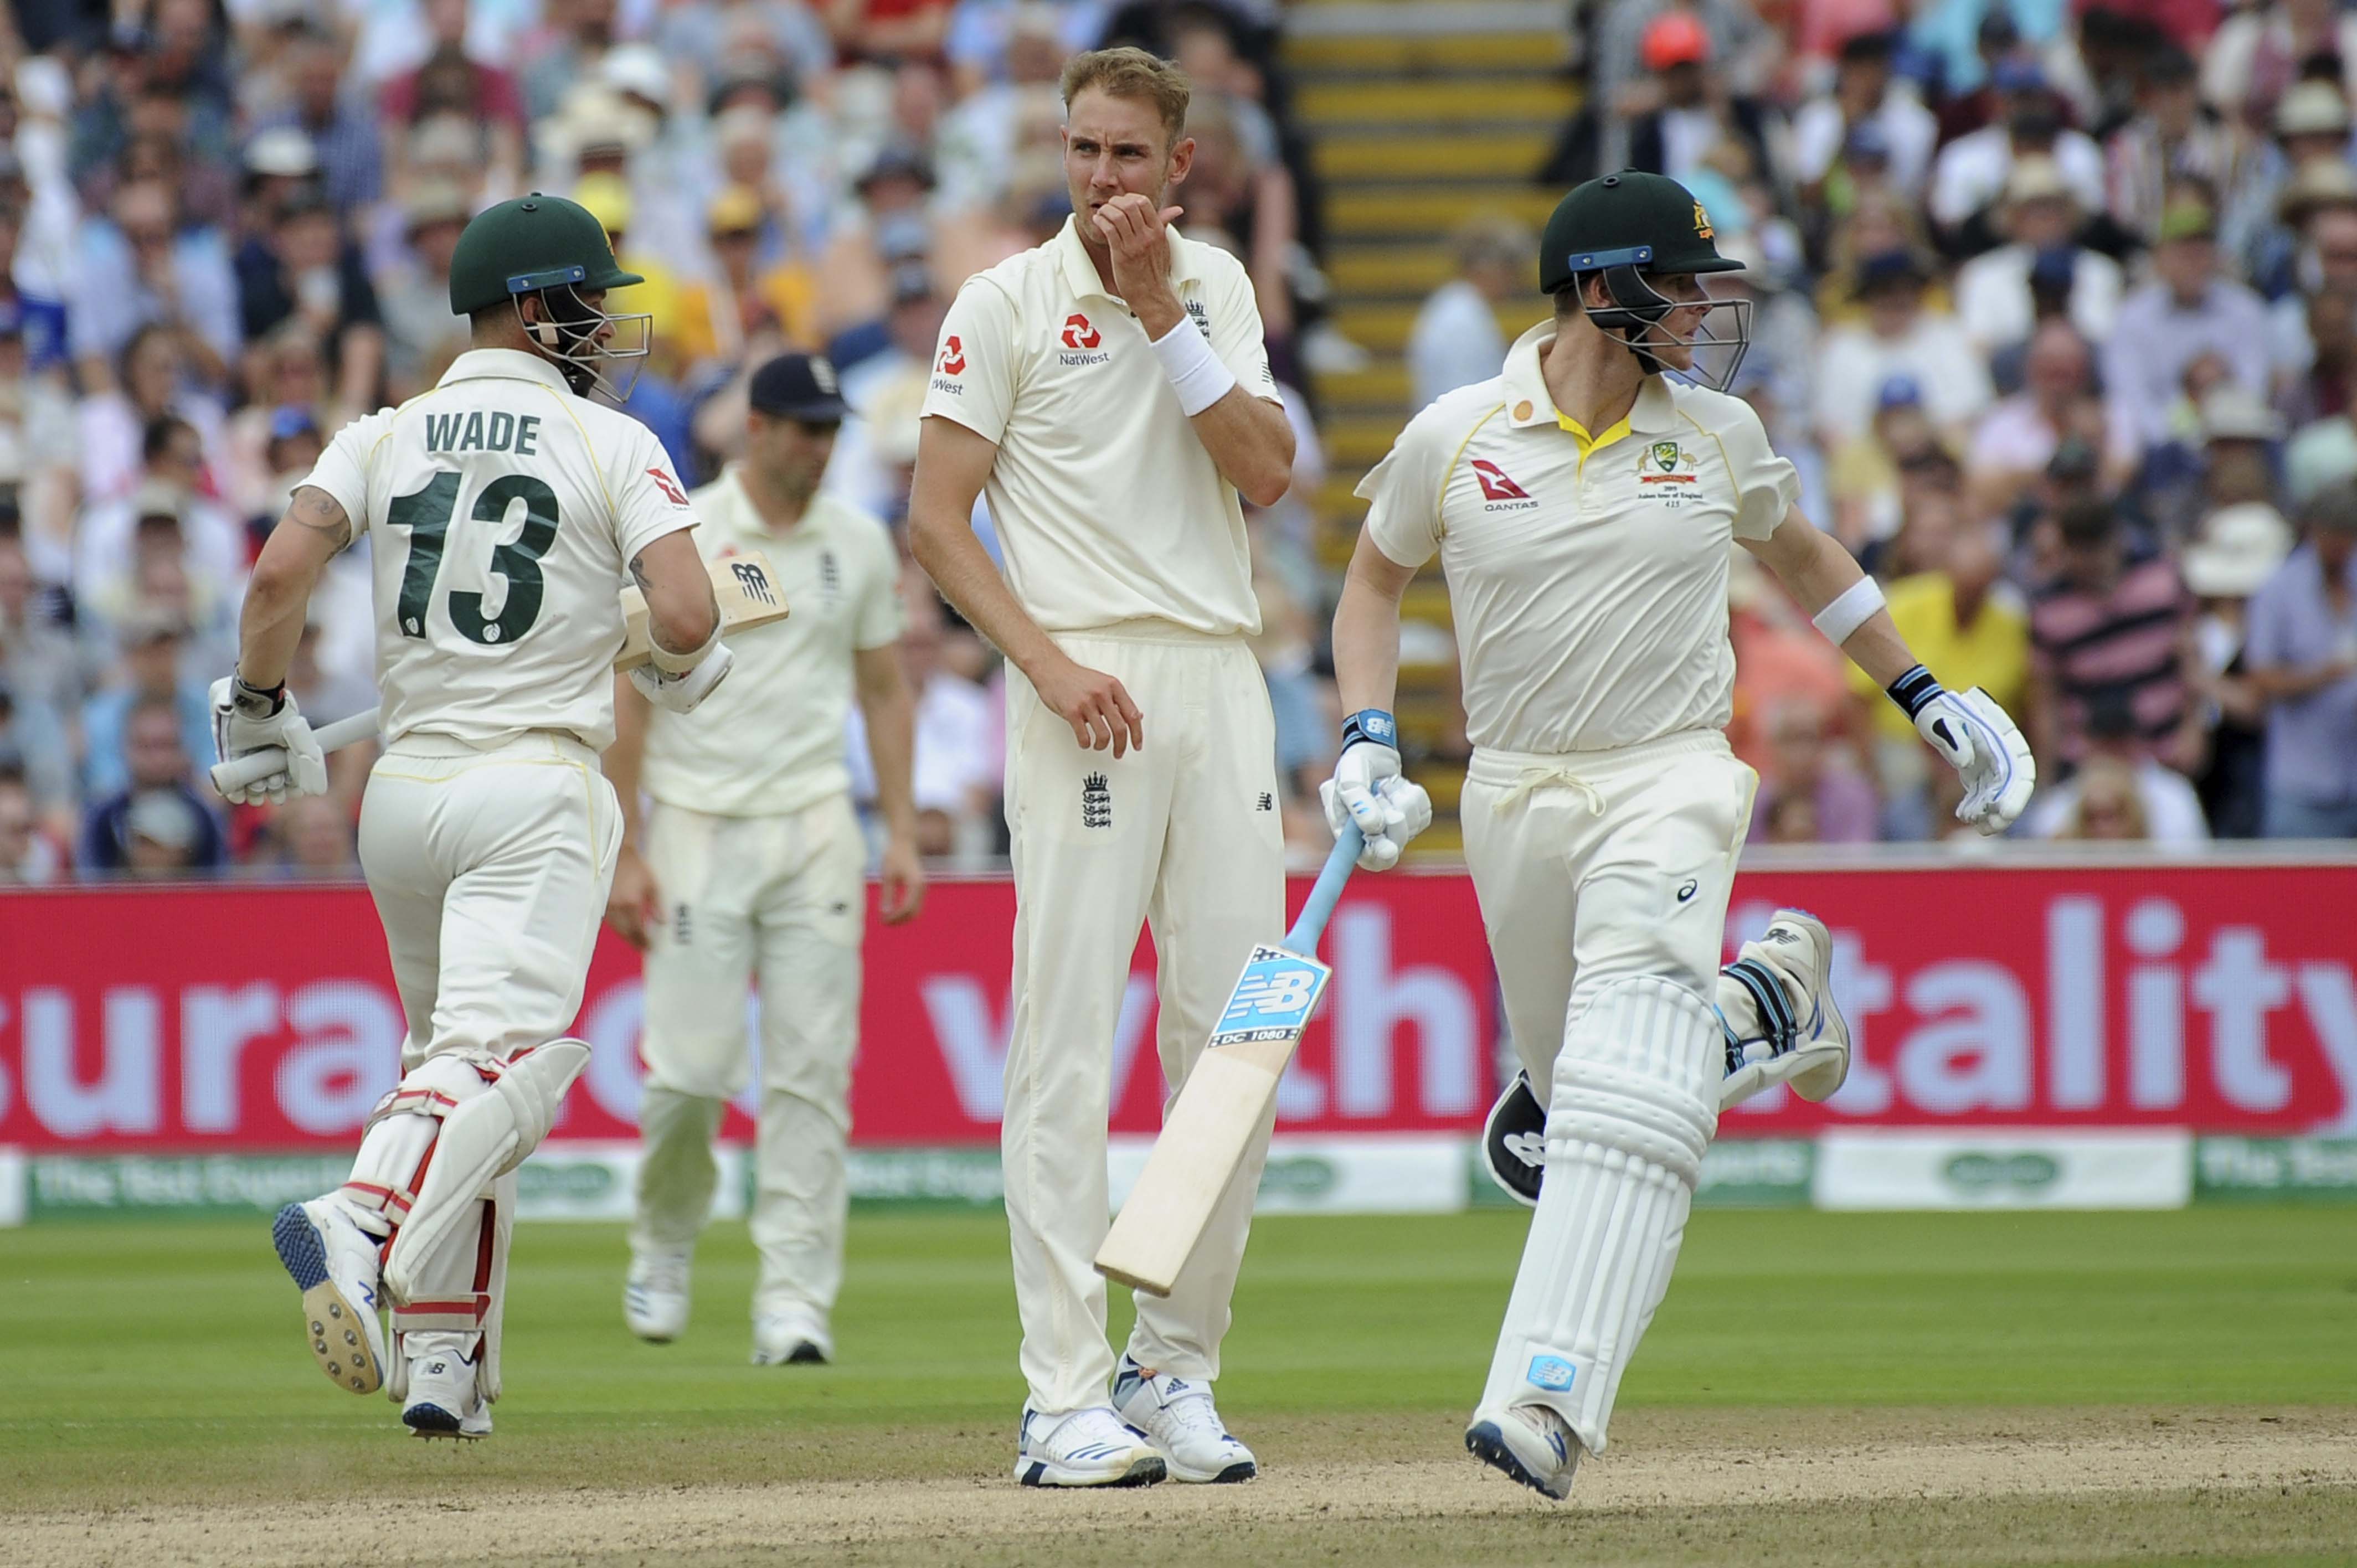 Ashes opener, Ashes series, Steve Smith, Australia, England, Chris Woakes, Matthew Wade, Tim Paine, Cricket, english news website, The Federal